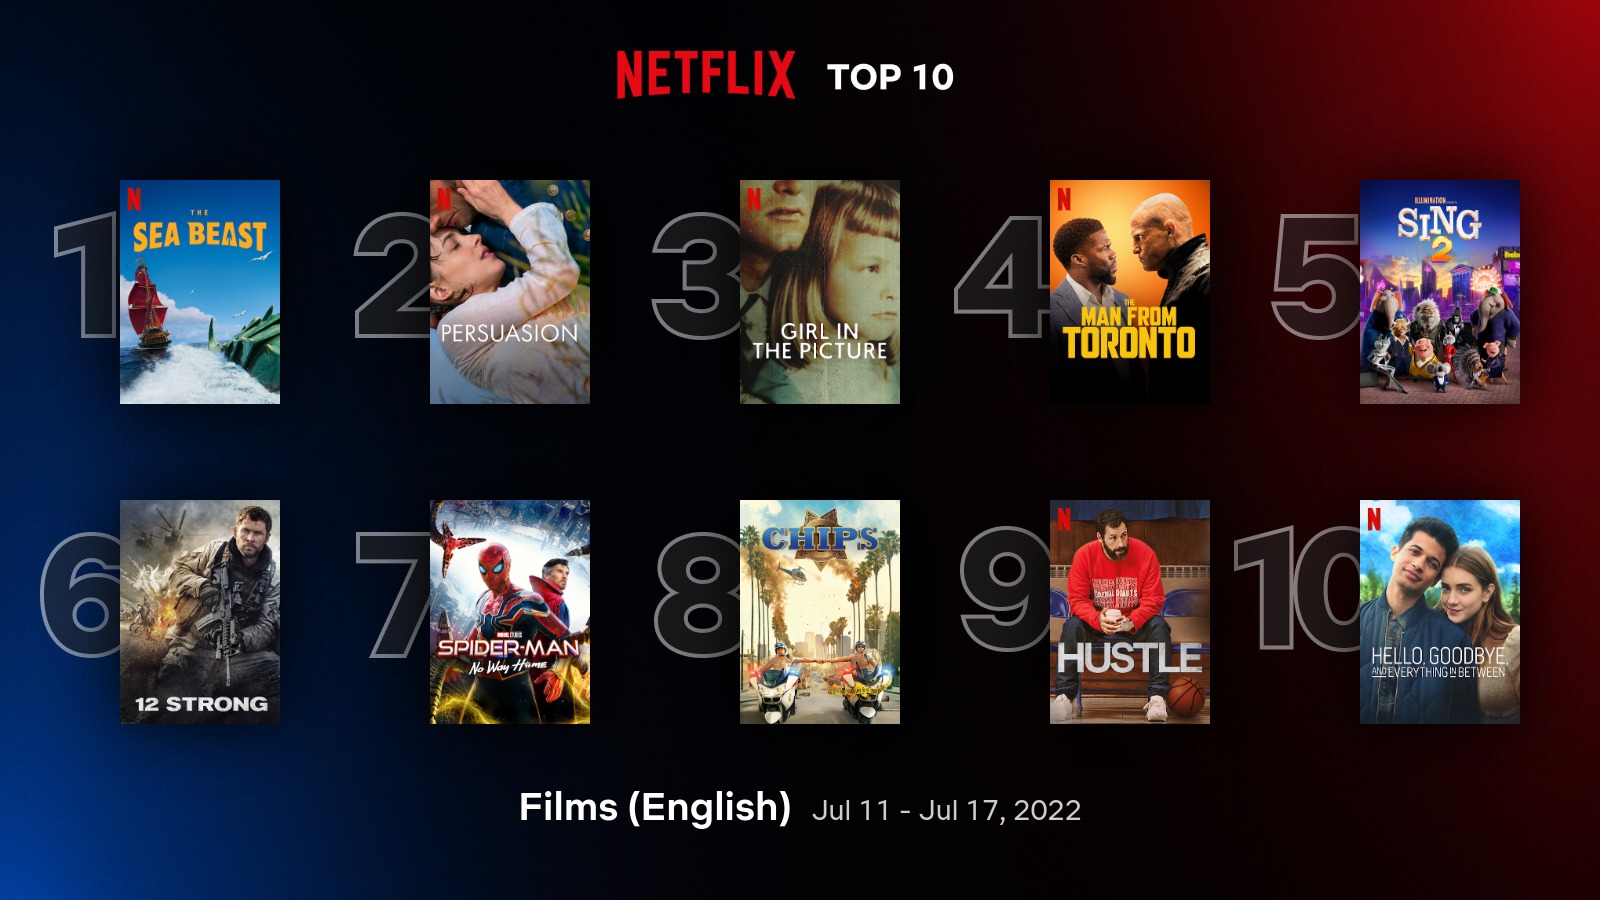 Netflix Top 10 Most Watched TV Shows and Films for the Week July 11-July 17, 2022